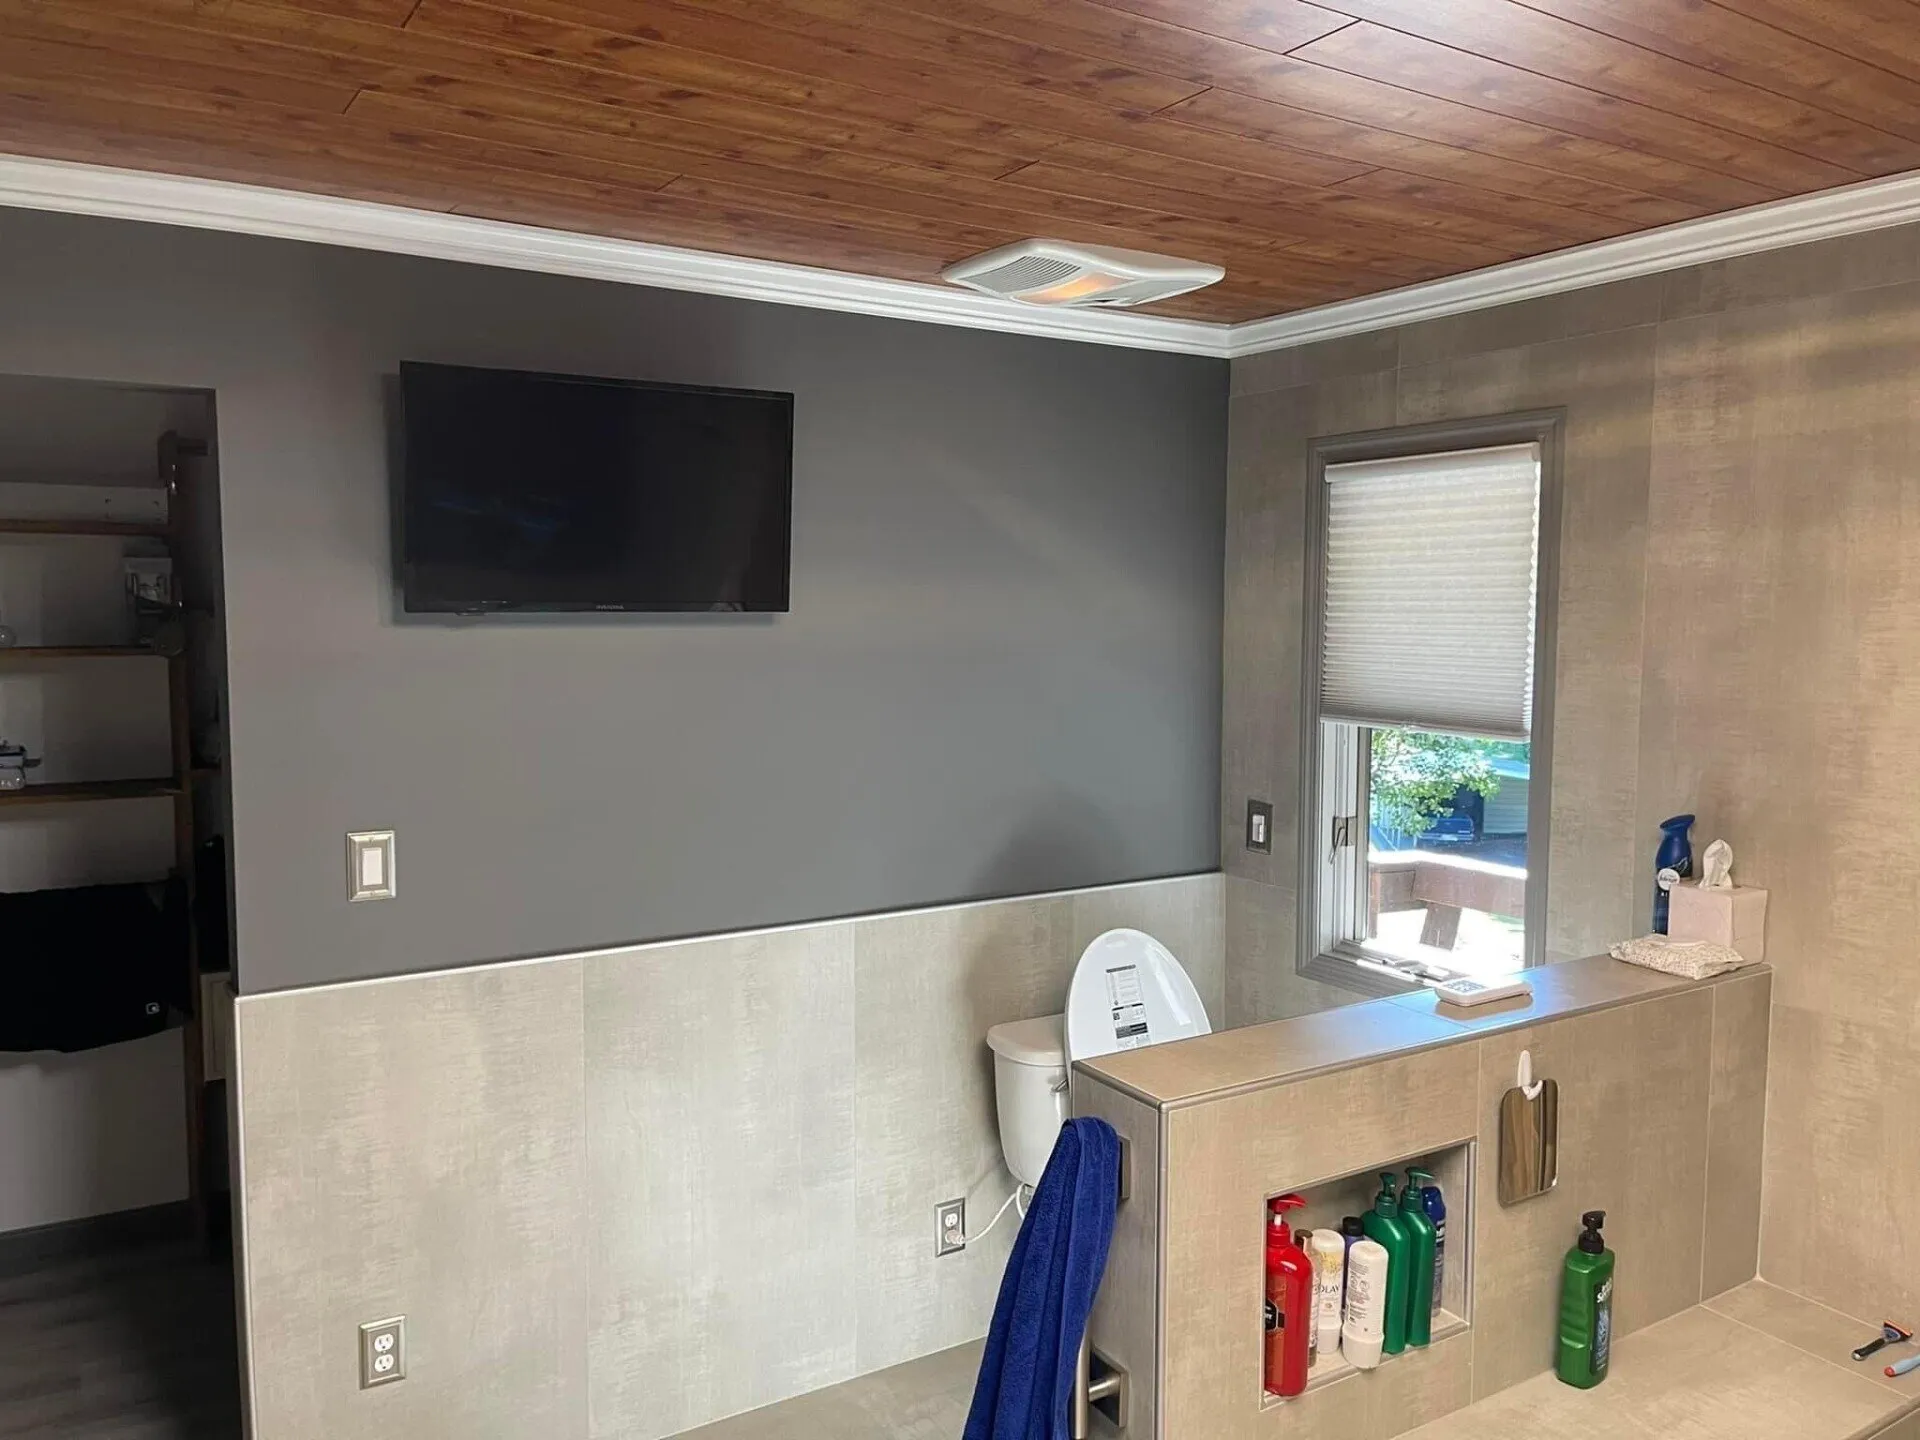 A bathroom with a tv mounted on the wall.